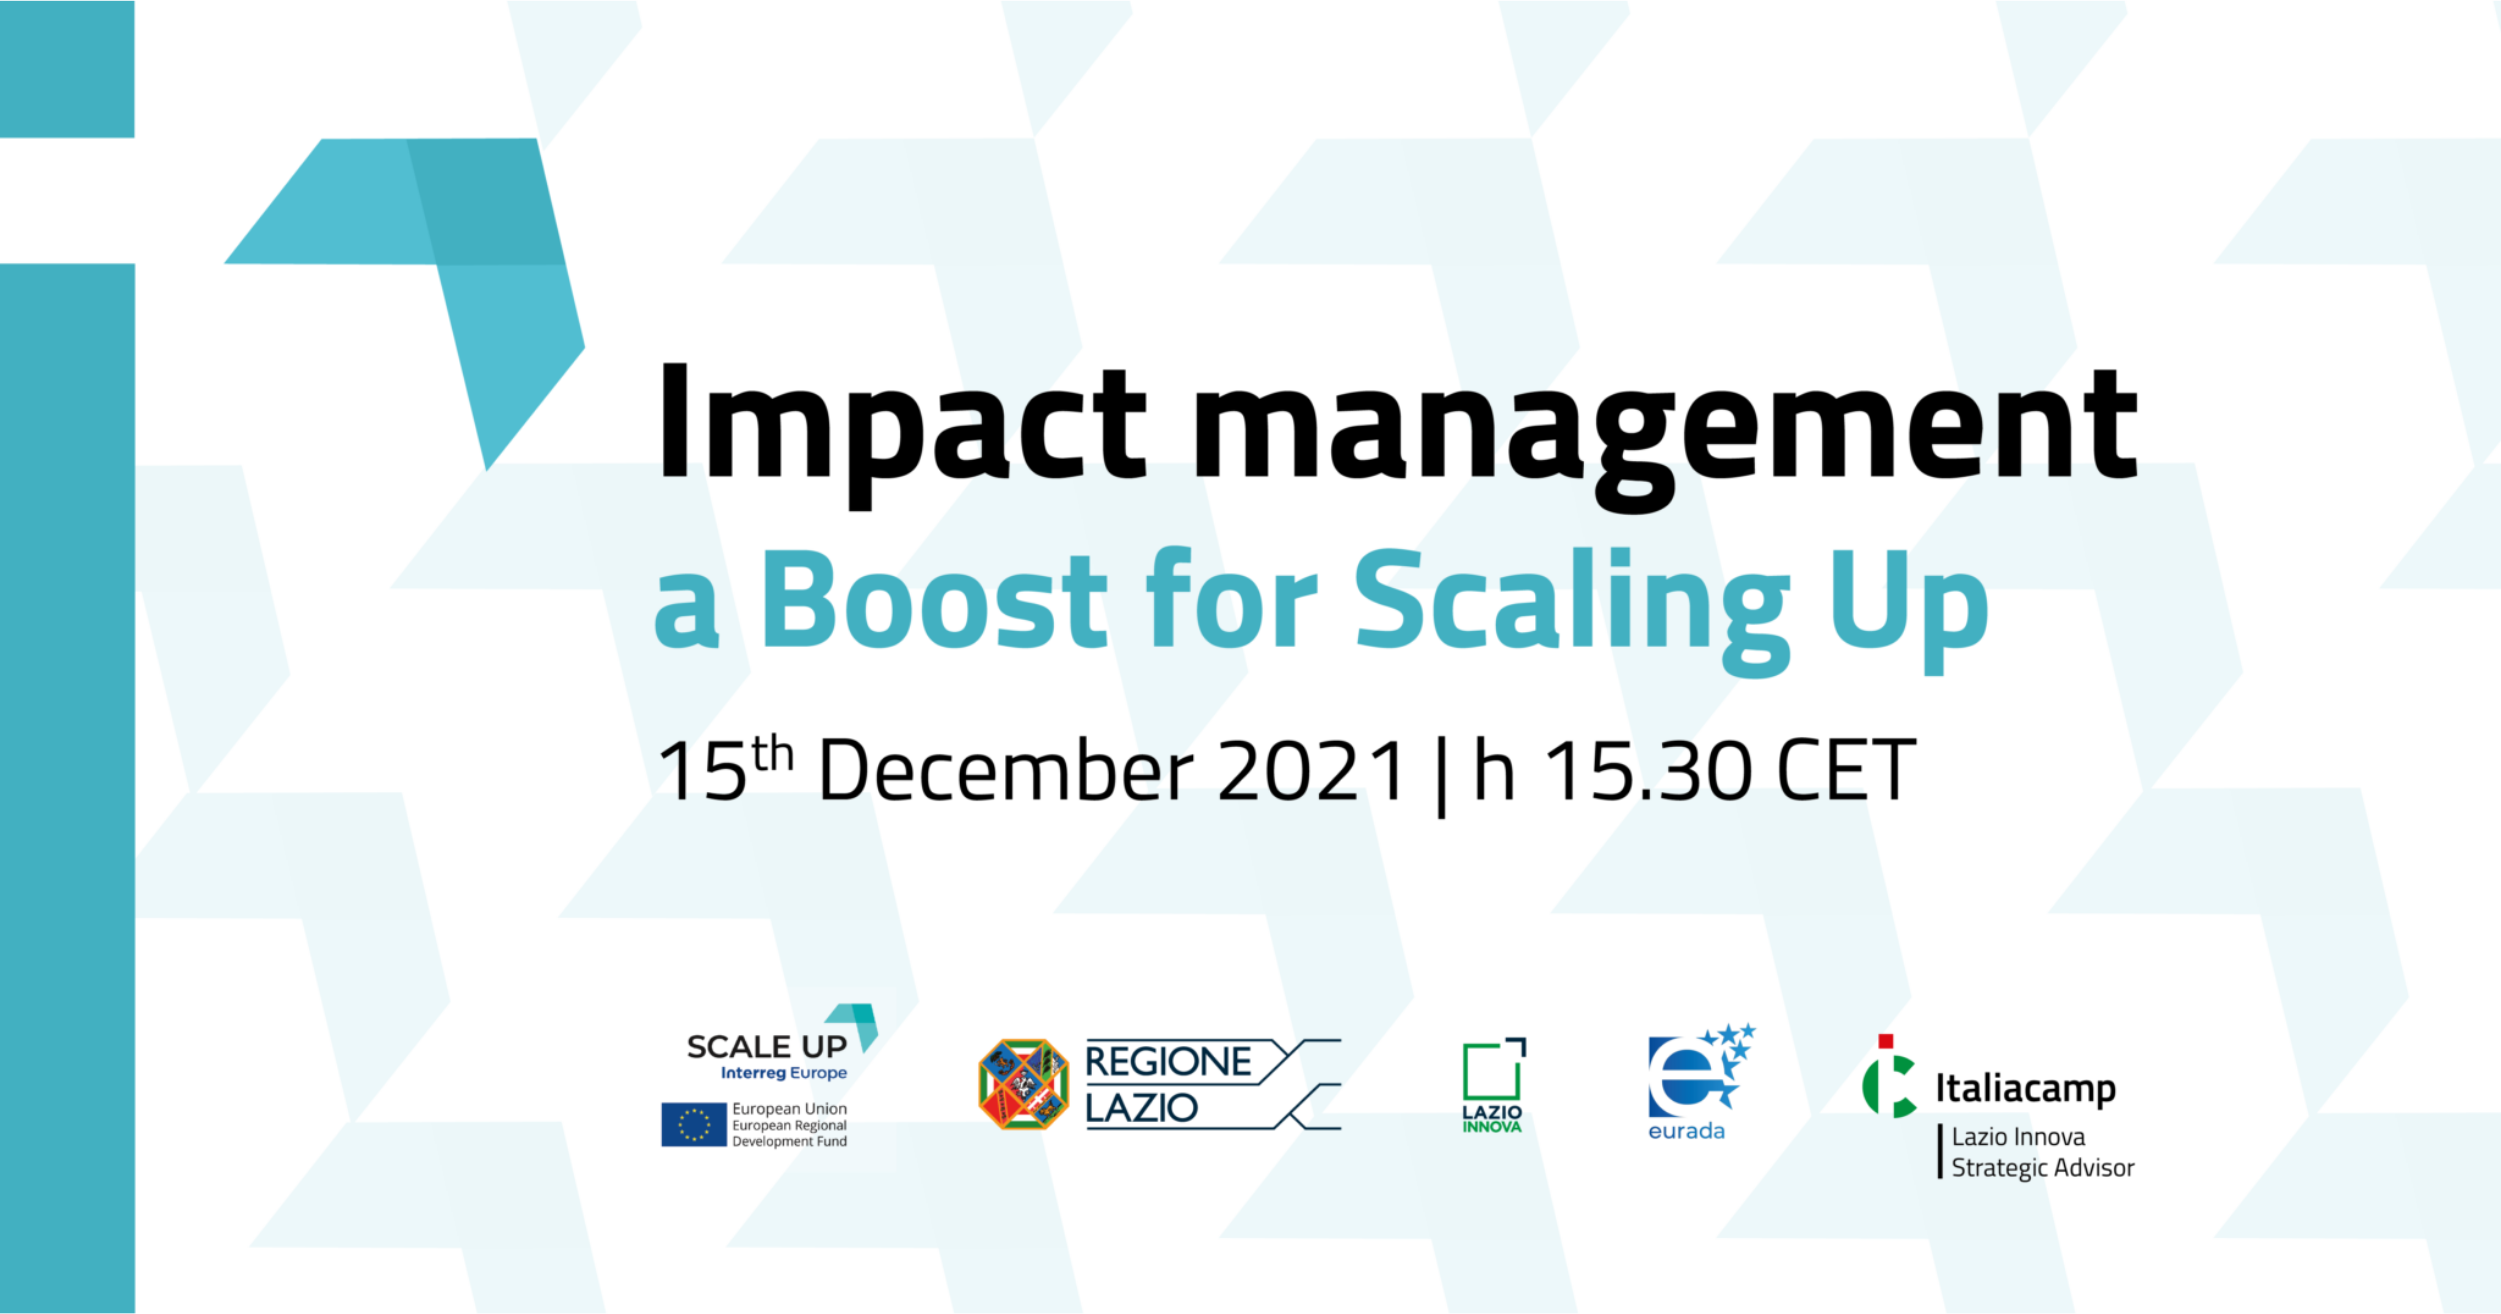 Italiacamp Lazio Innova impact management a boost for scaling up